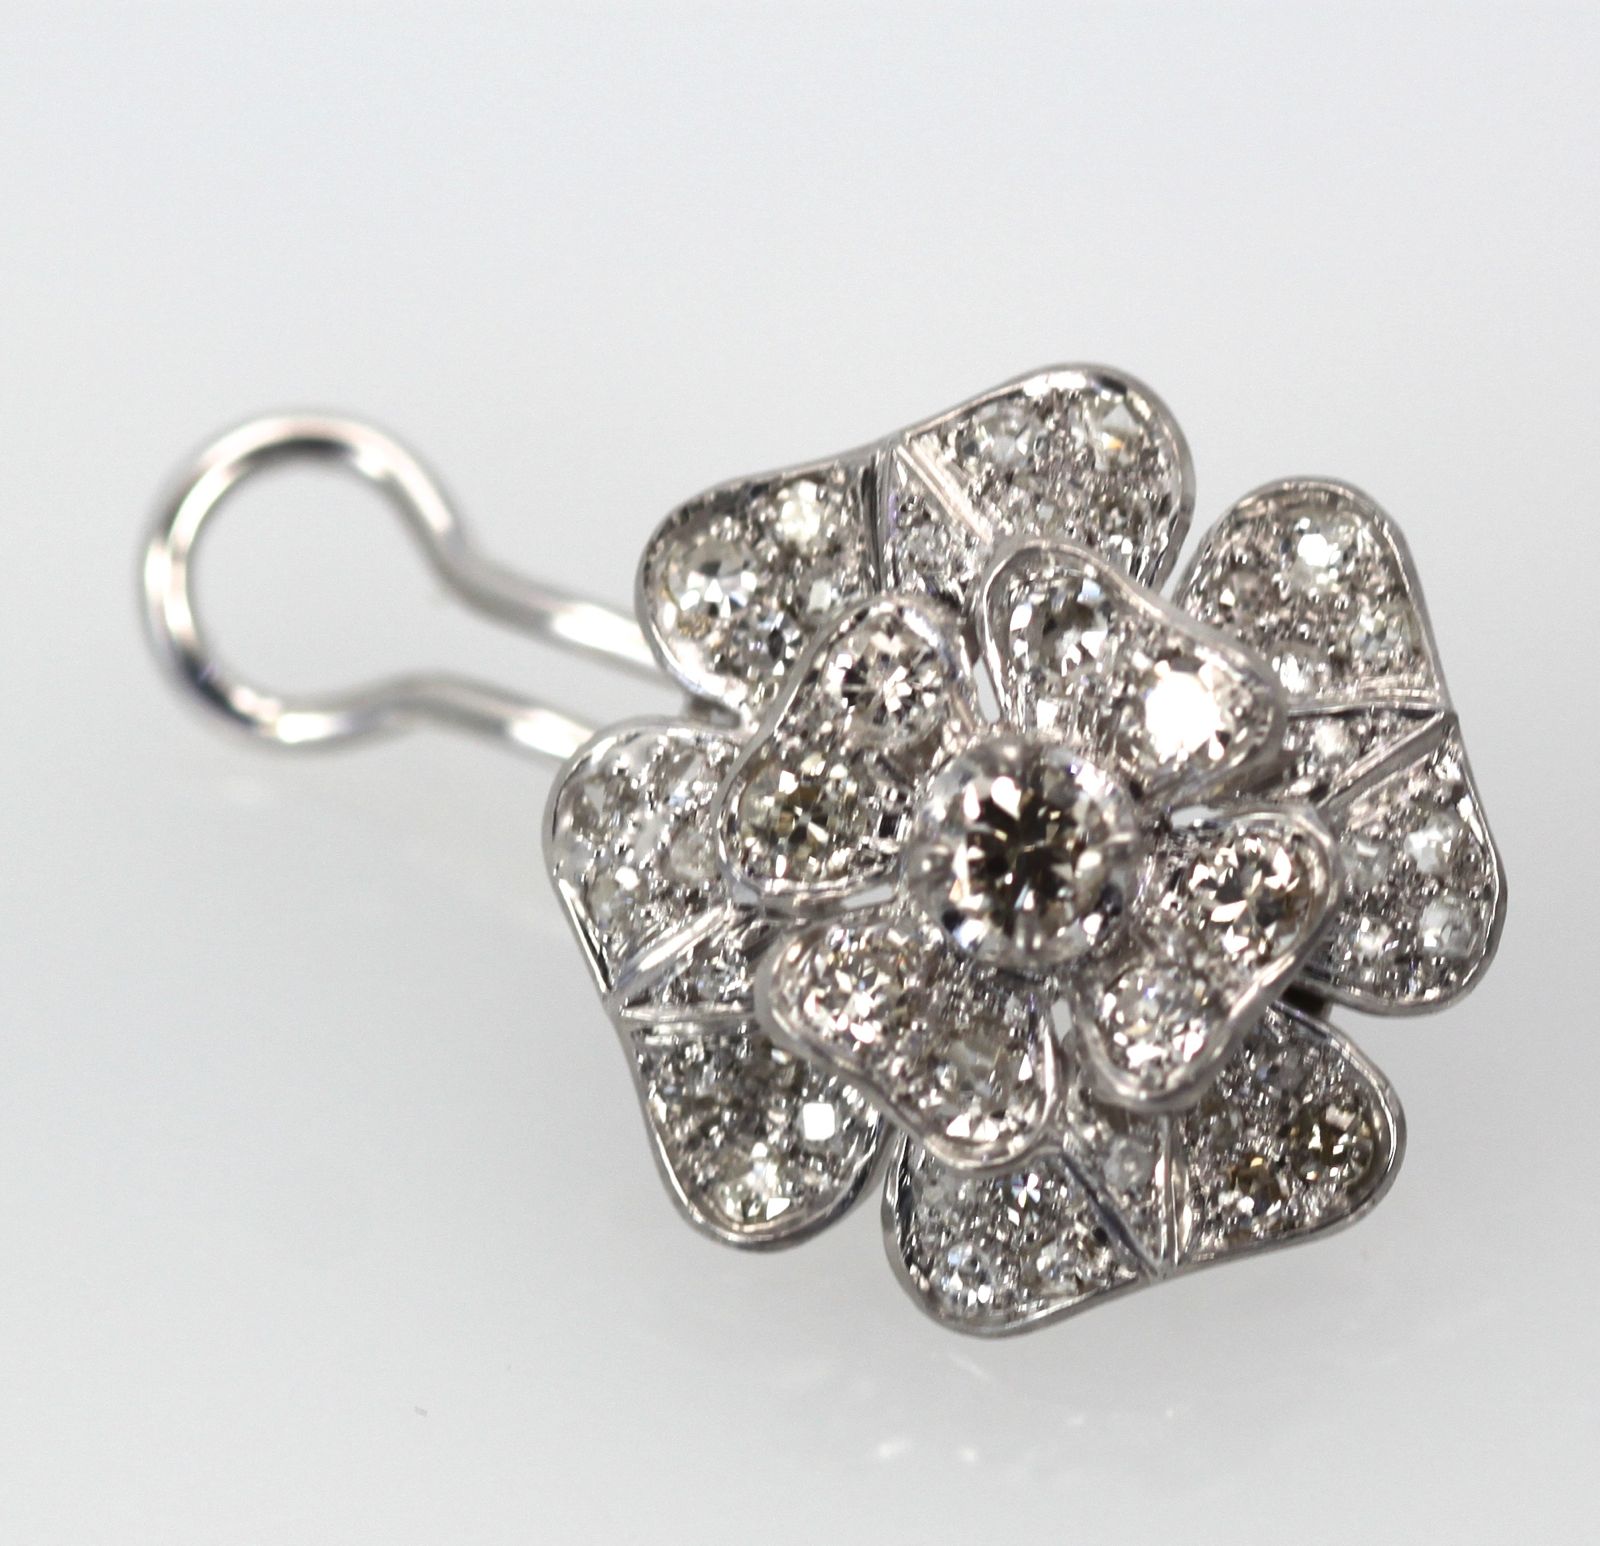 Vintage Platinum Diamond Rose Earrings early 20th Century Italy 3.00 Carats with clasp